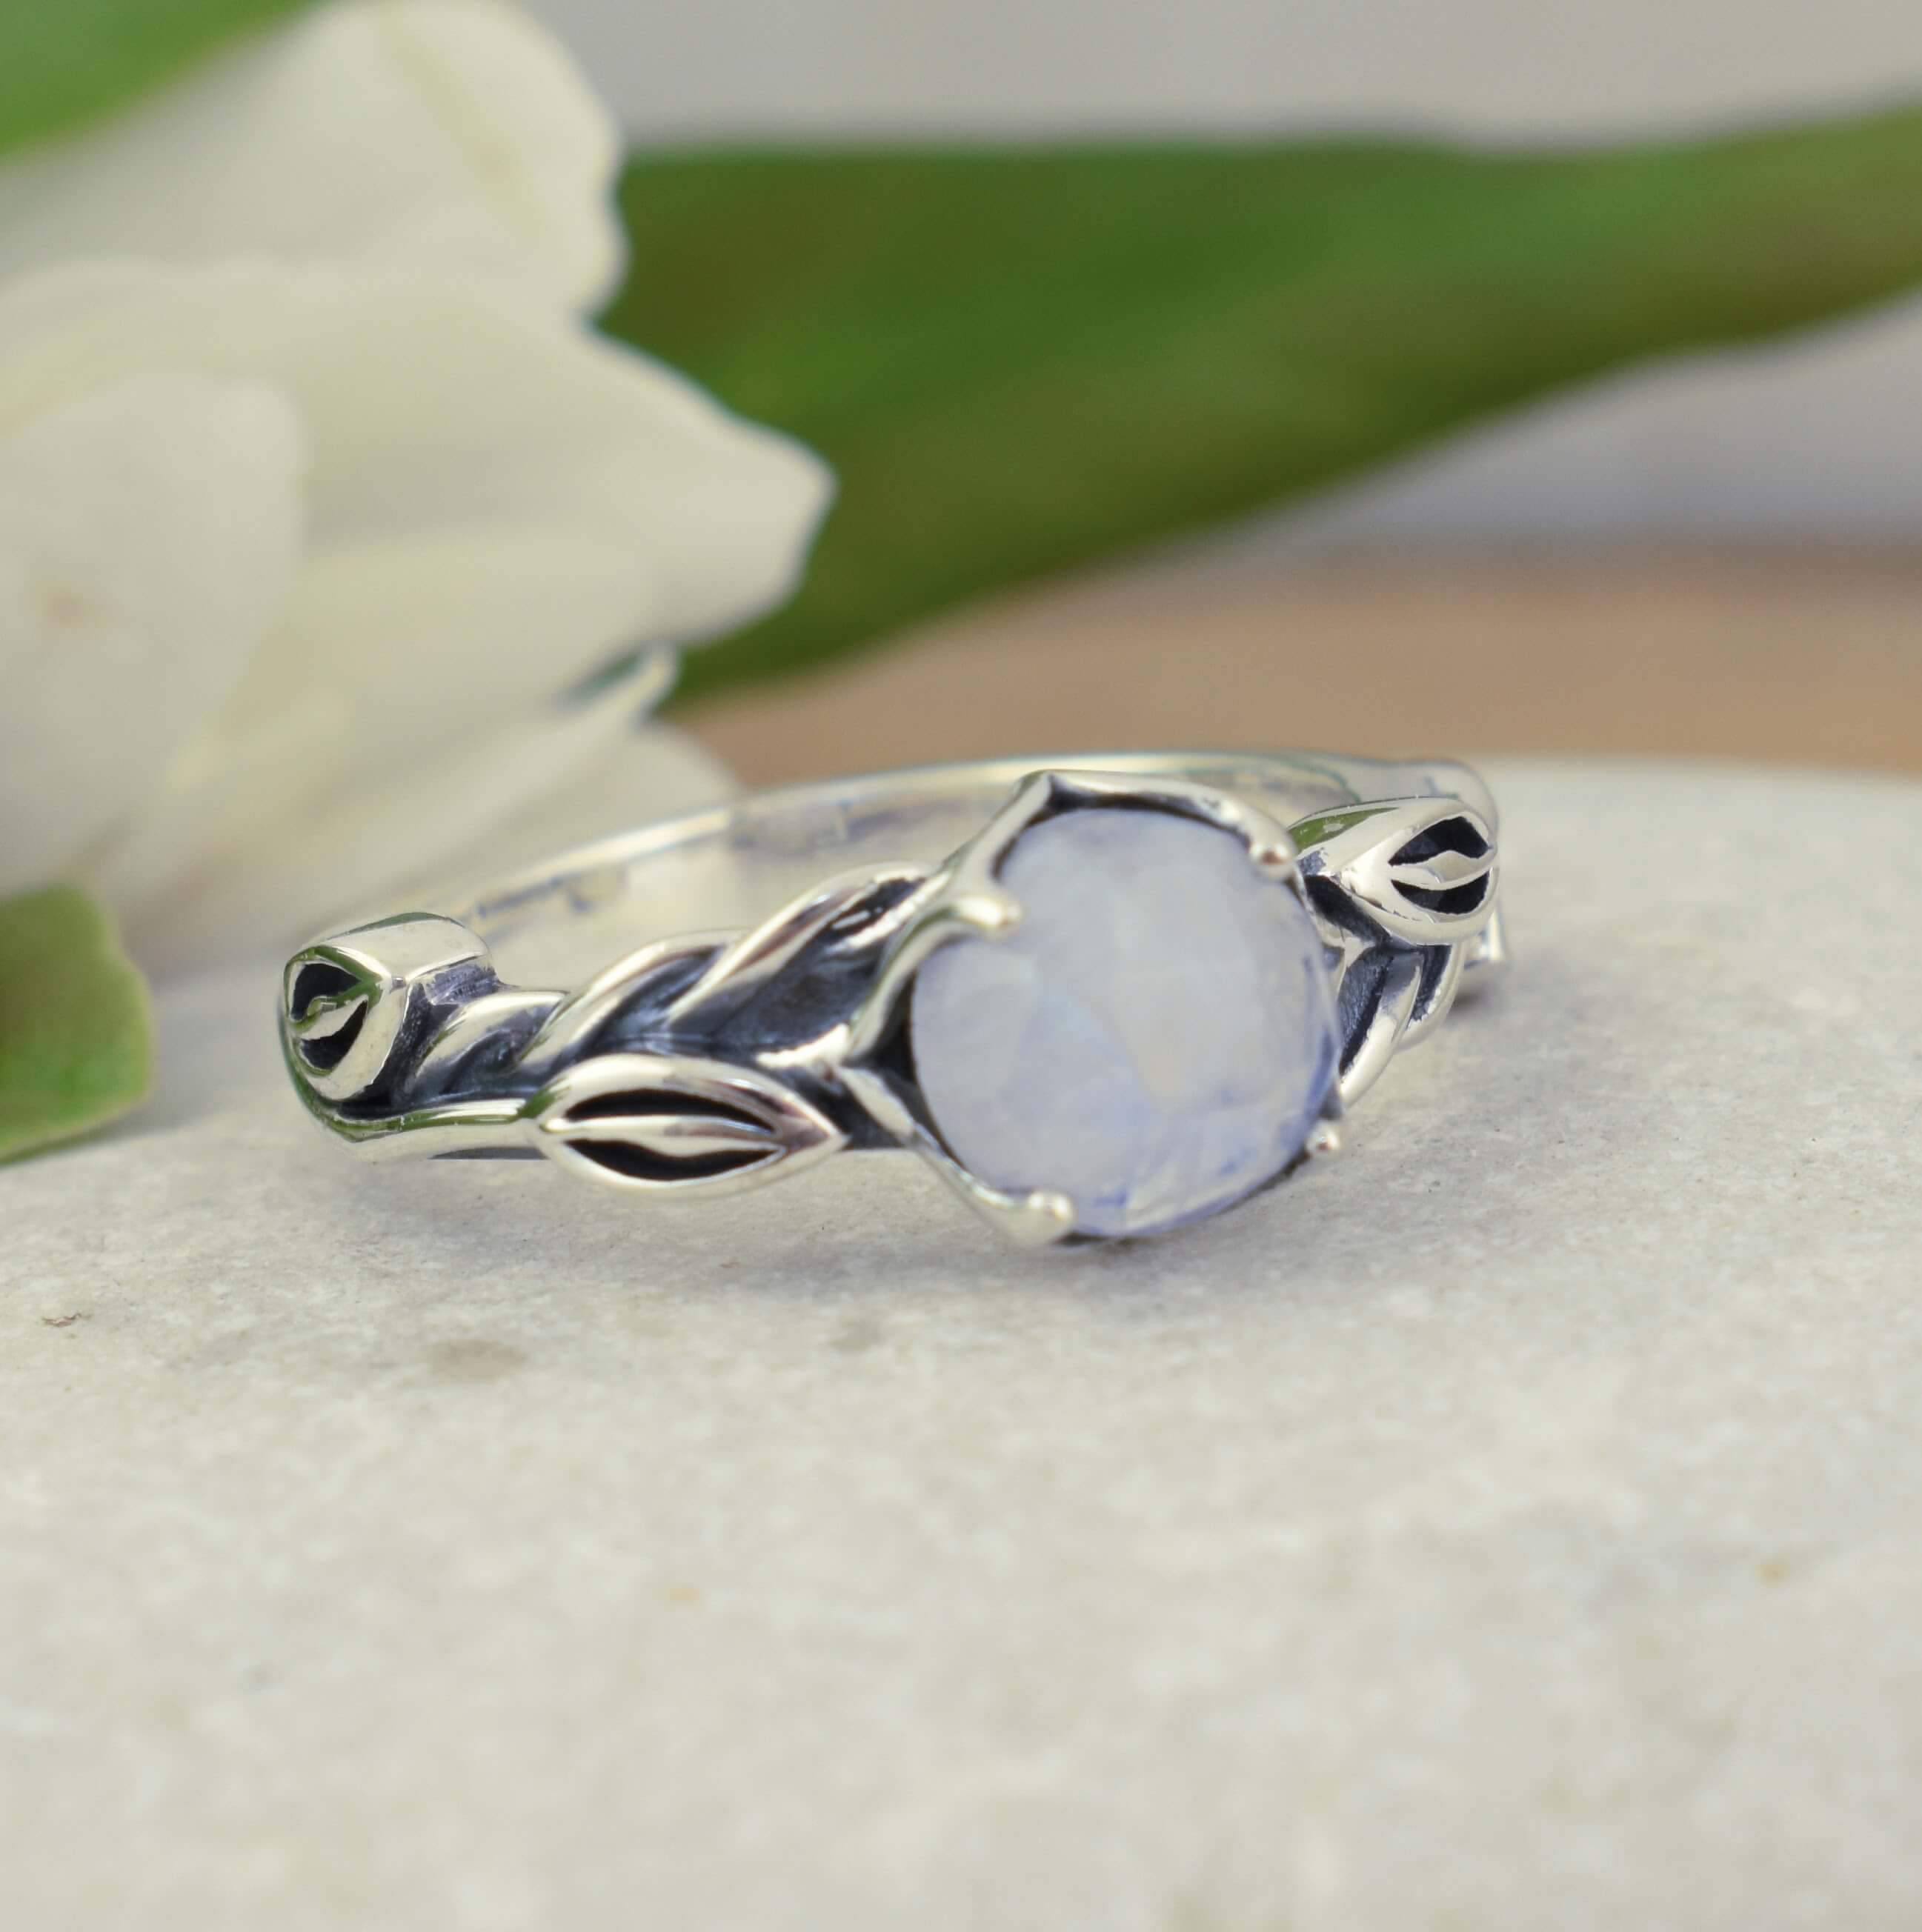 .925 sterling silver ring with vine design band and rainbow moonstone